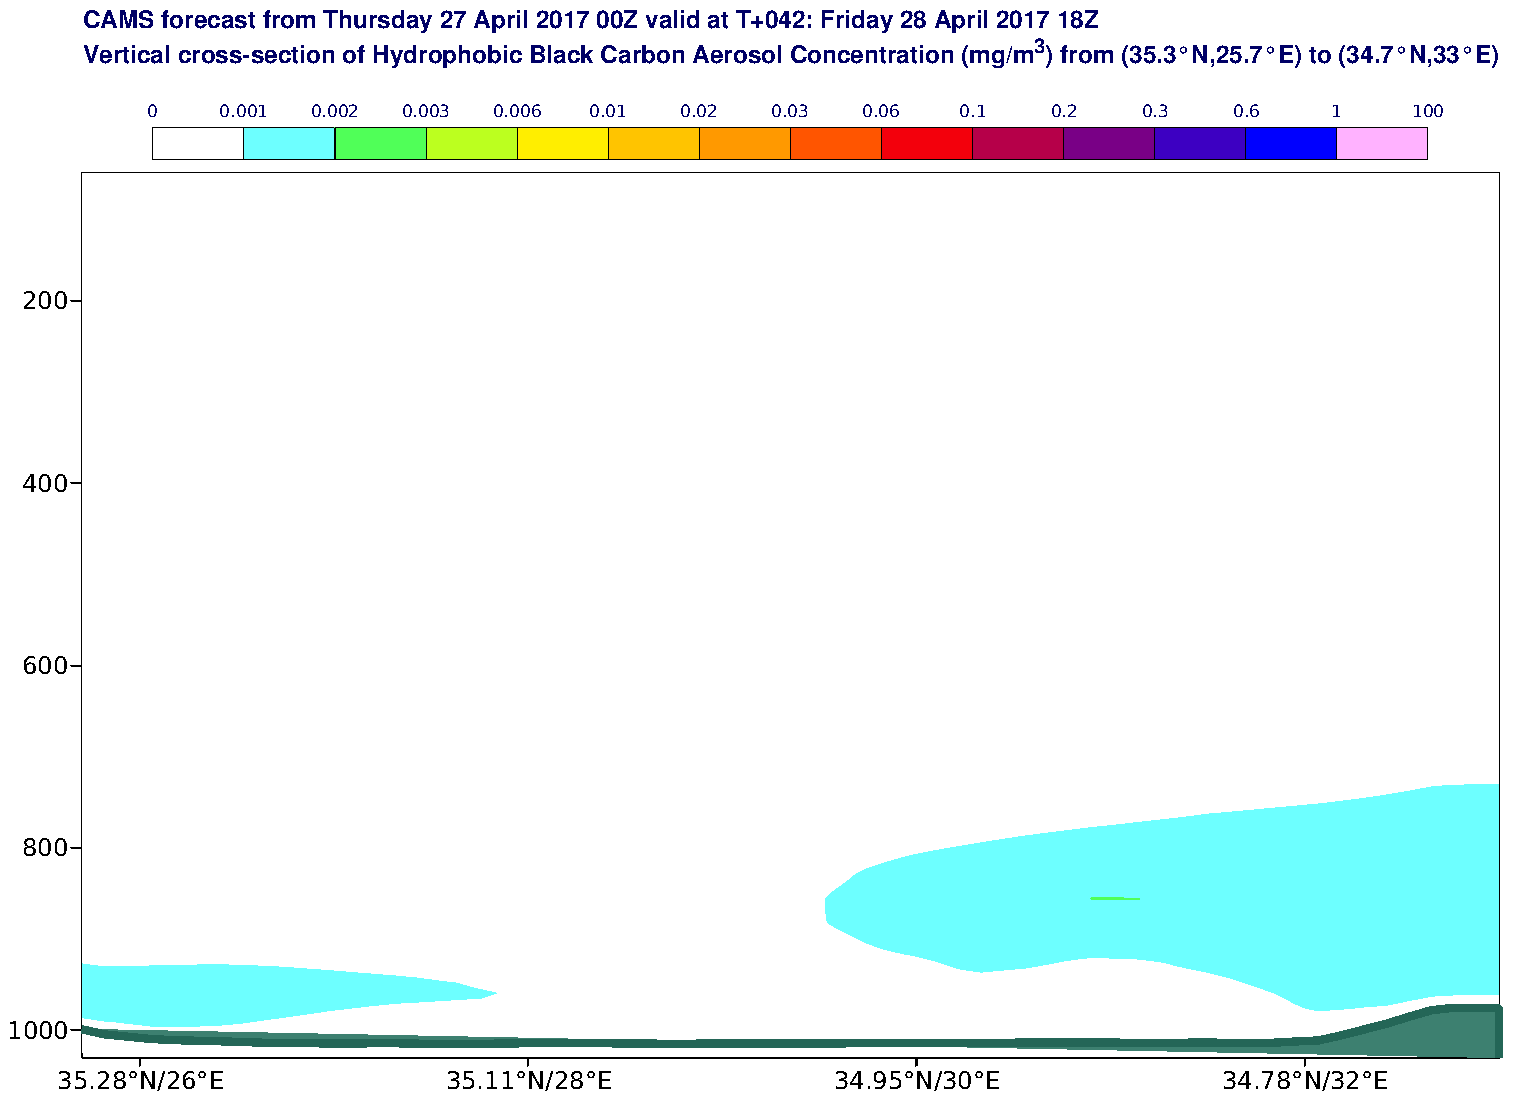 Vertical cross-section of Hydrophobic Black Carbon Aerosol Concentration (mg/m3) valid at T42 - 2017-04-28 18:00